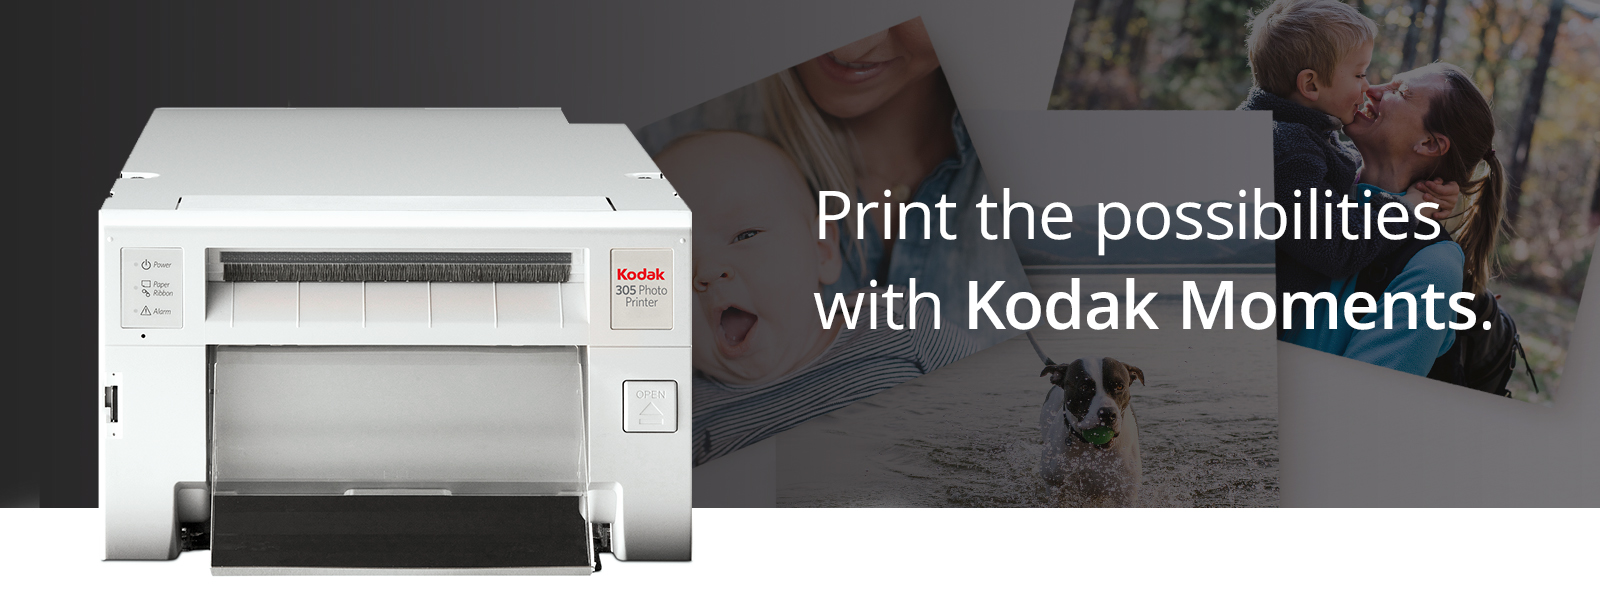 Print the possibilities with Kodak Moments